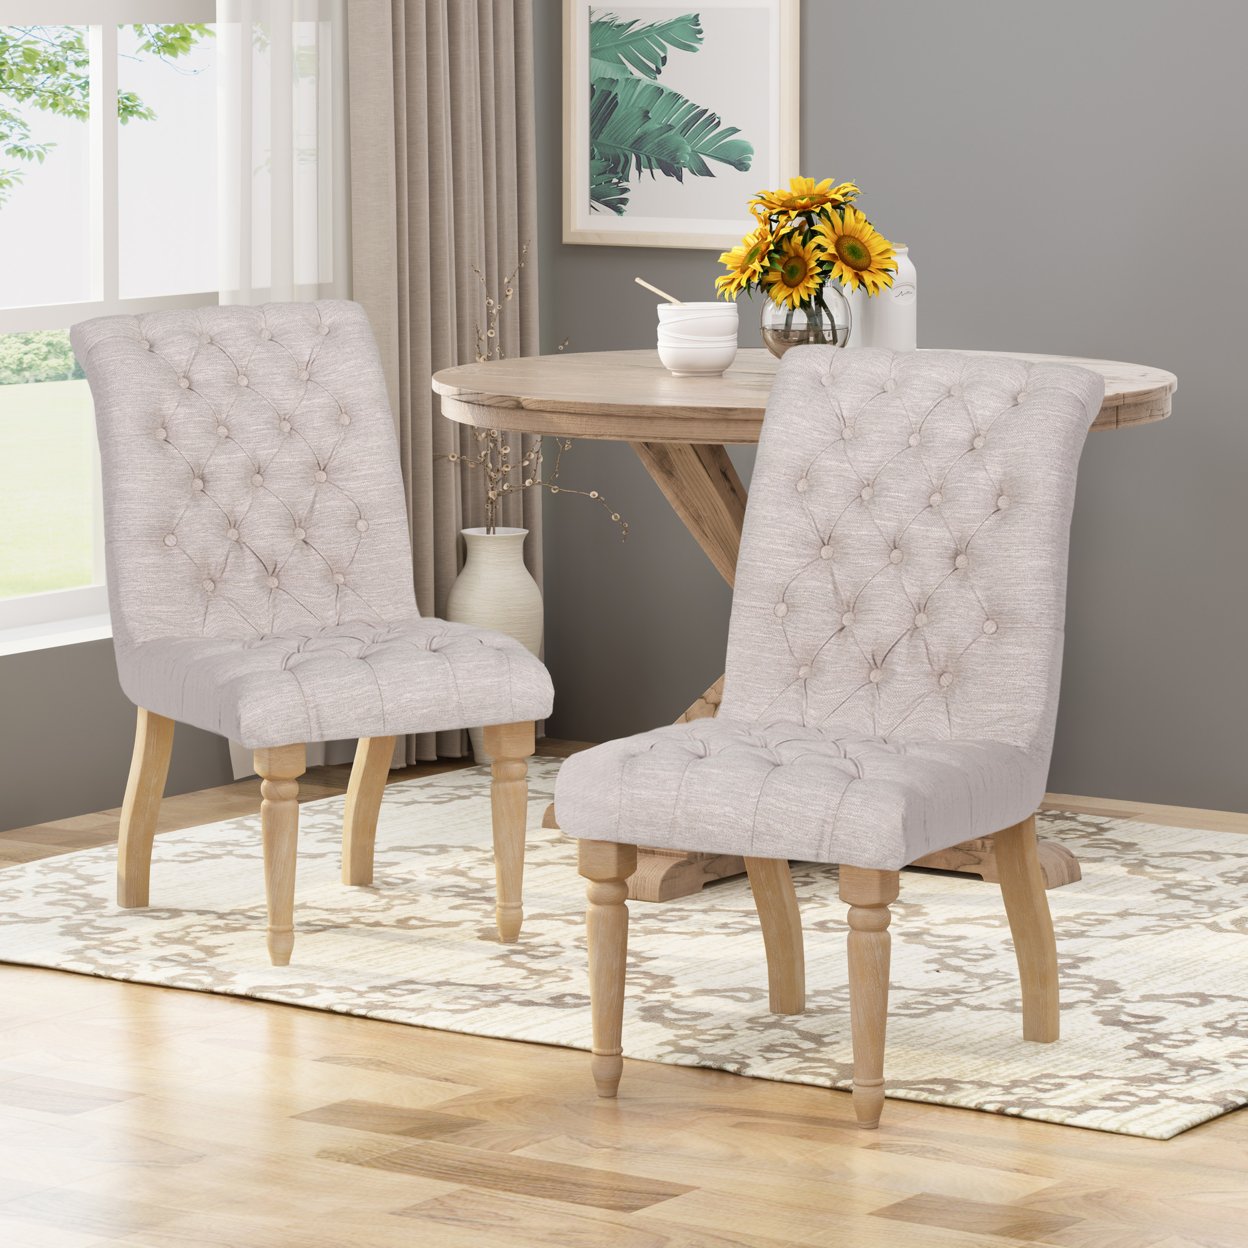 Terrance Tufted Fabric Dining Chair (Set Of 2) - Beige + Natural